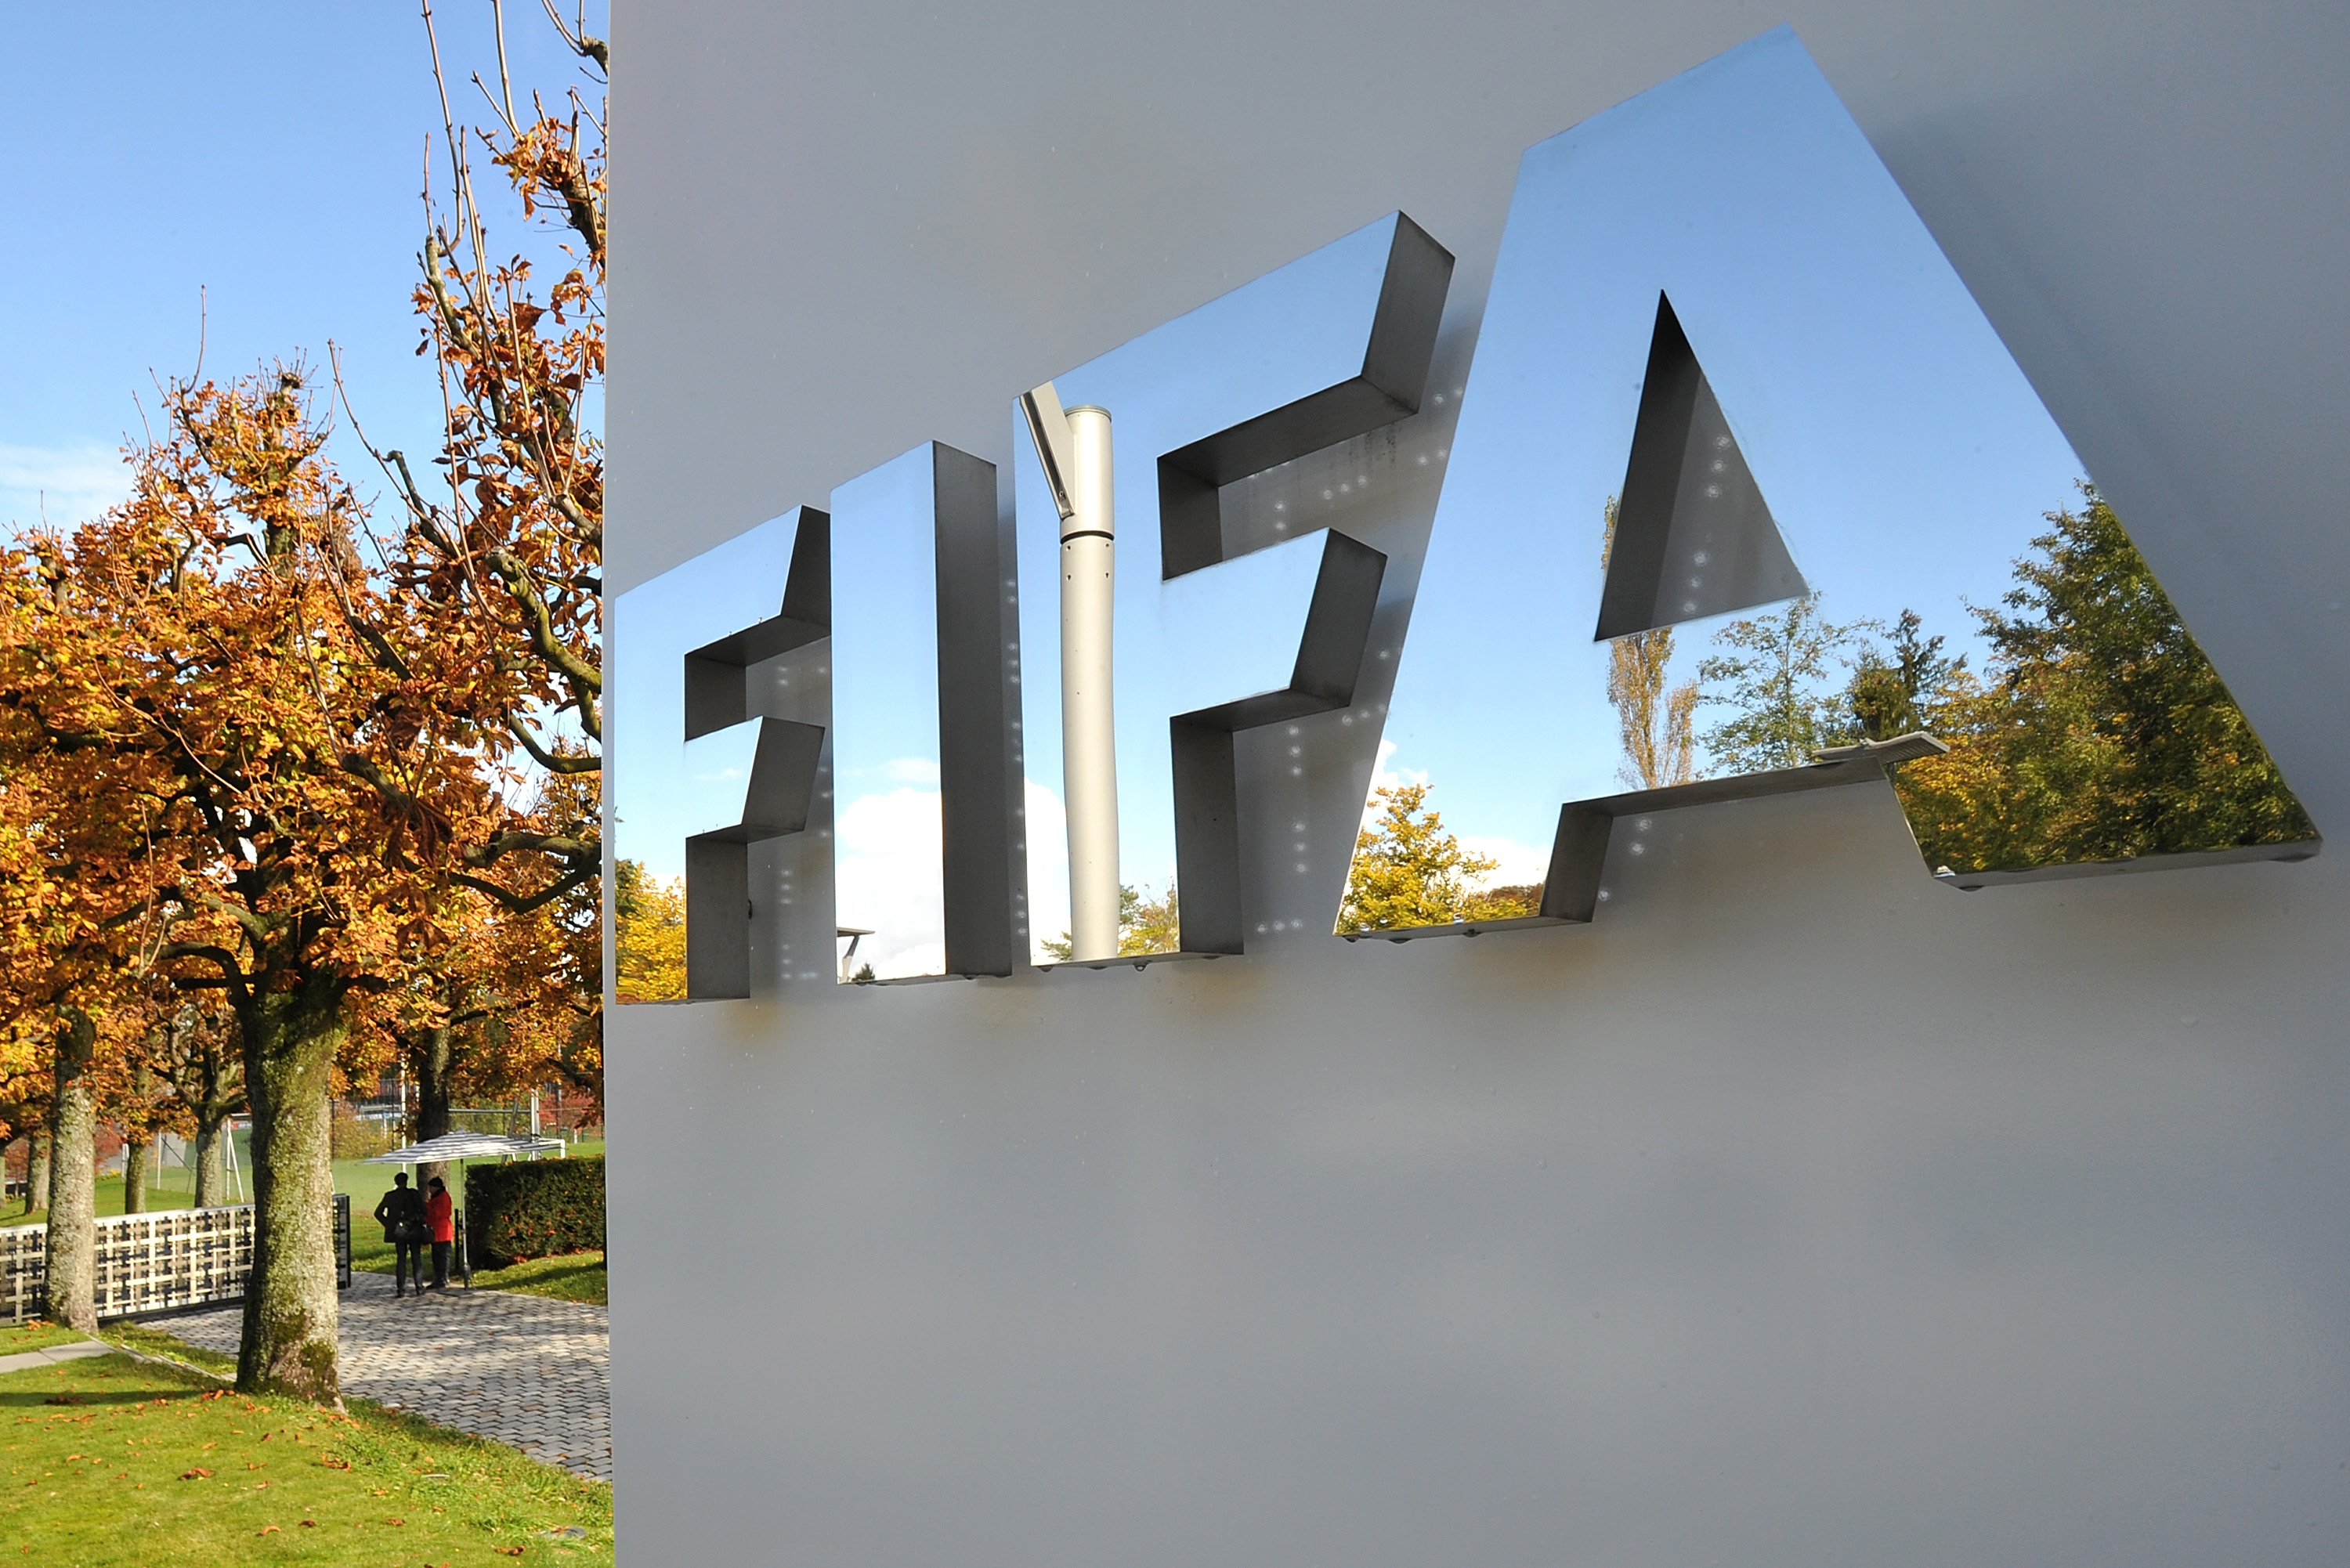 FIFA awarded $201m in confiscated funds by the US after corruption probe